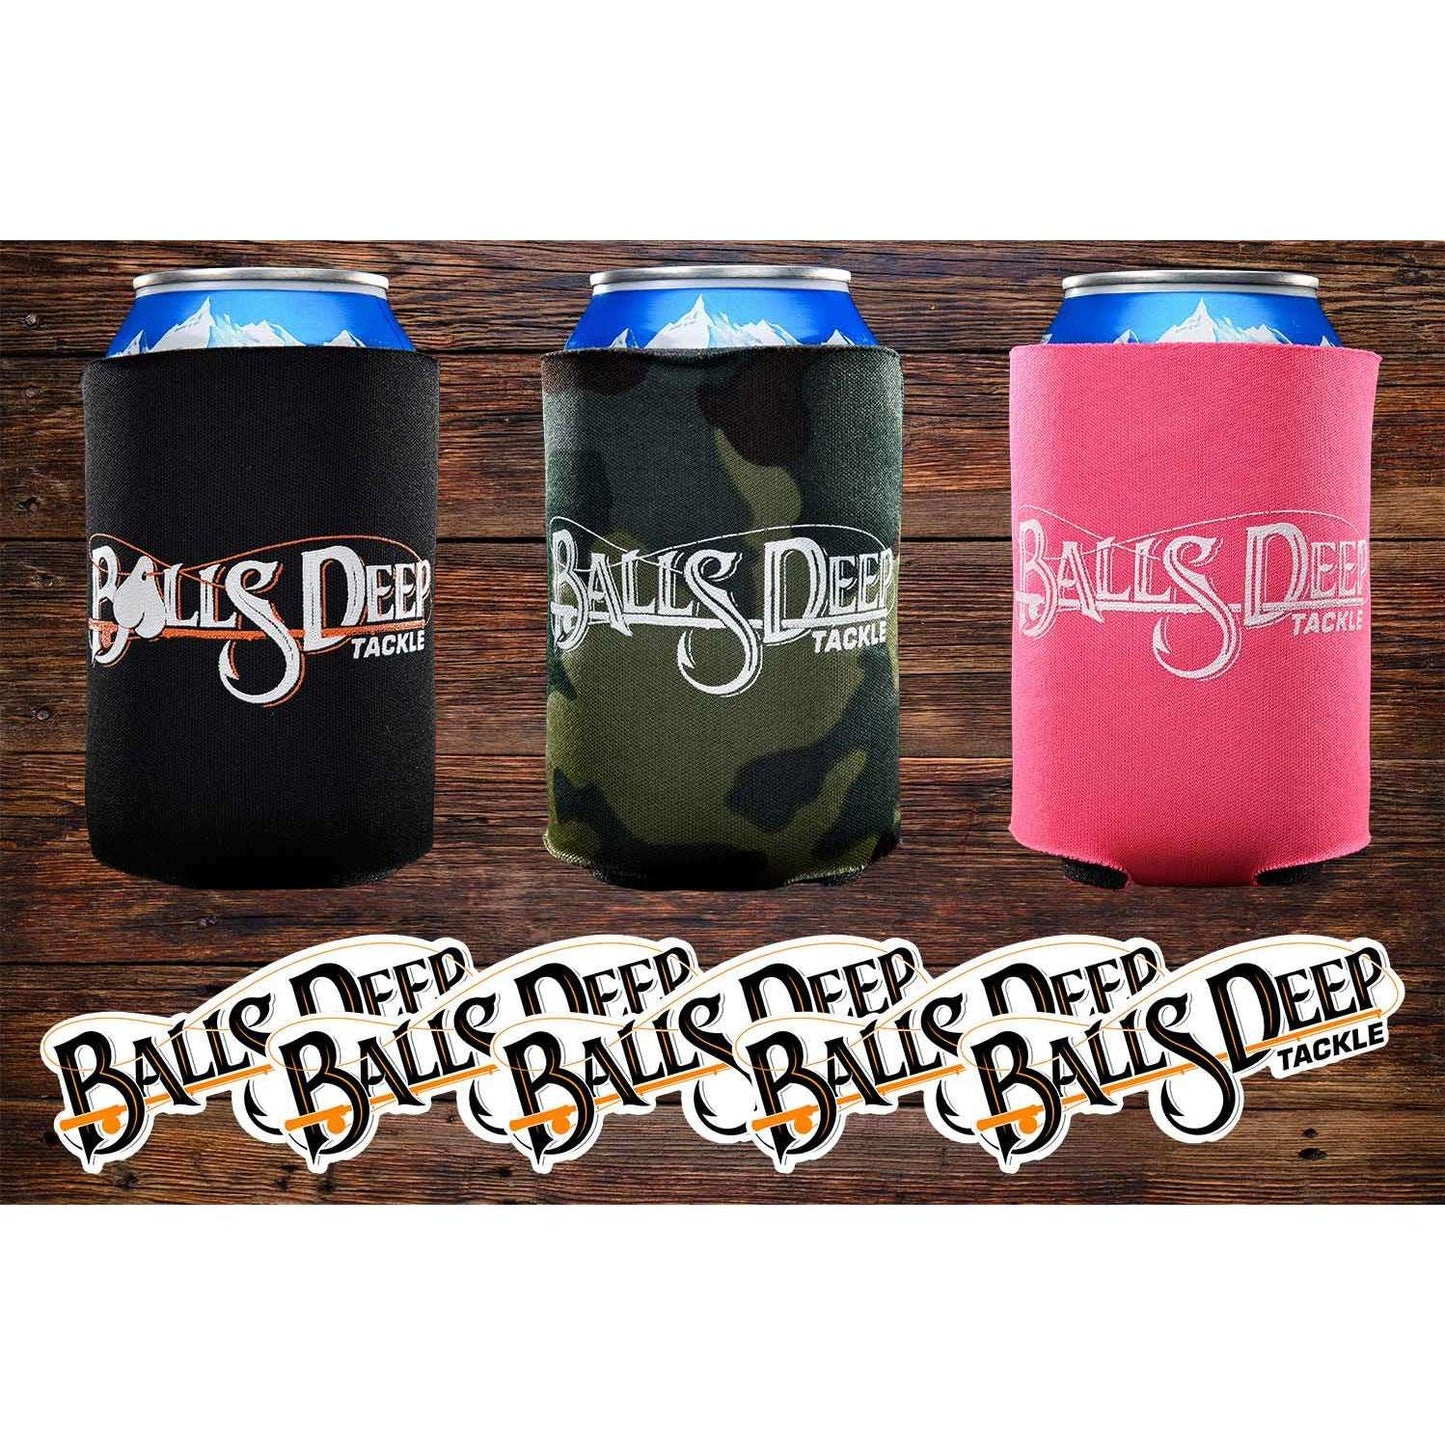 https://ballsdeeptackle.com/cdn/shop/products/balls-deep-tackle-funny-fishing-shirts-and-hats-fishing-gifts-for-men-koozie-3-pack-black-camo-pink-5-stickers-accessories-27835052.jpg?v=1602529995&width=1445